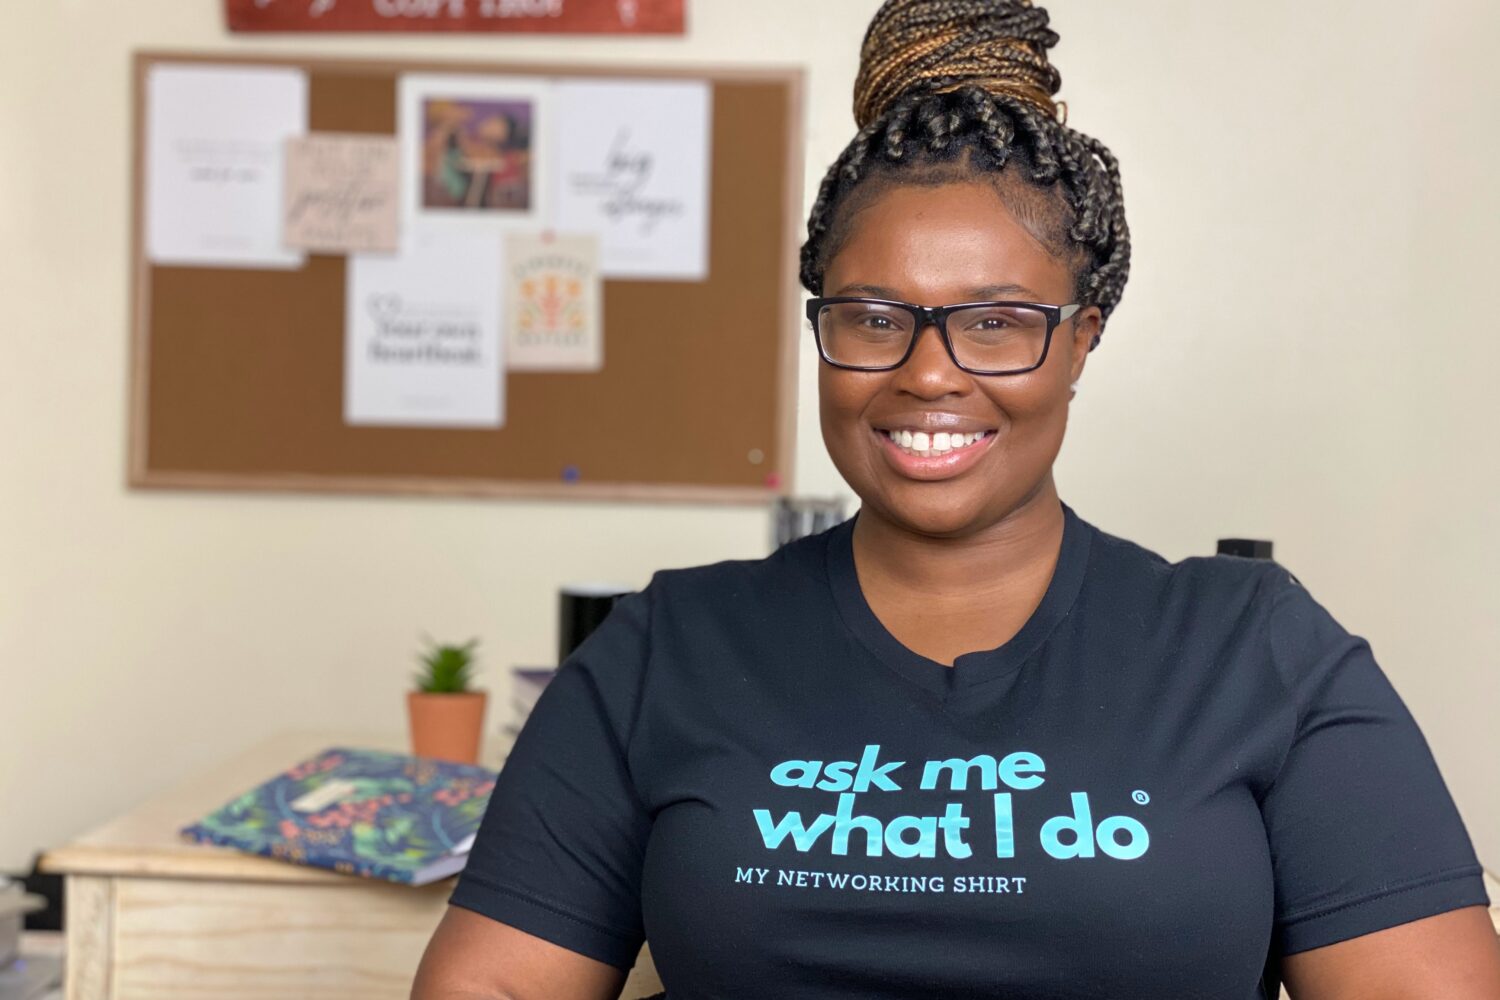 woman wearing a shirt "ask me what I do" while starting a business in college